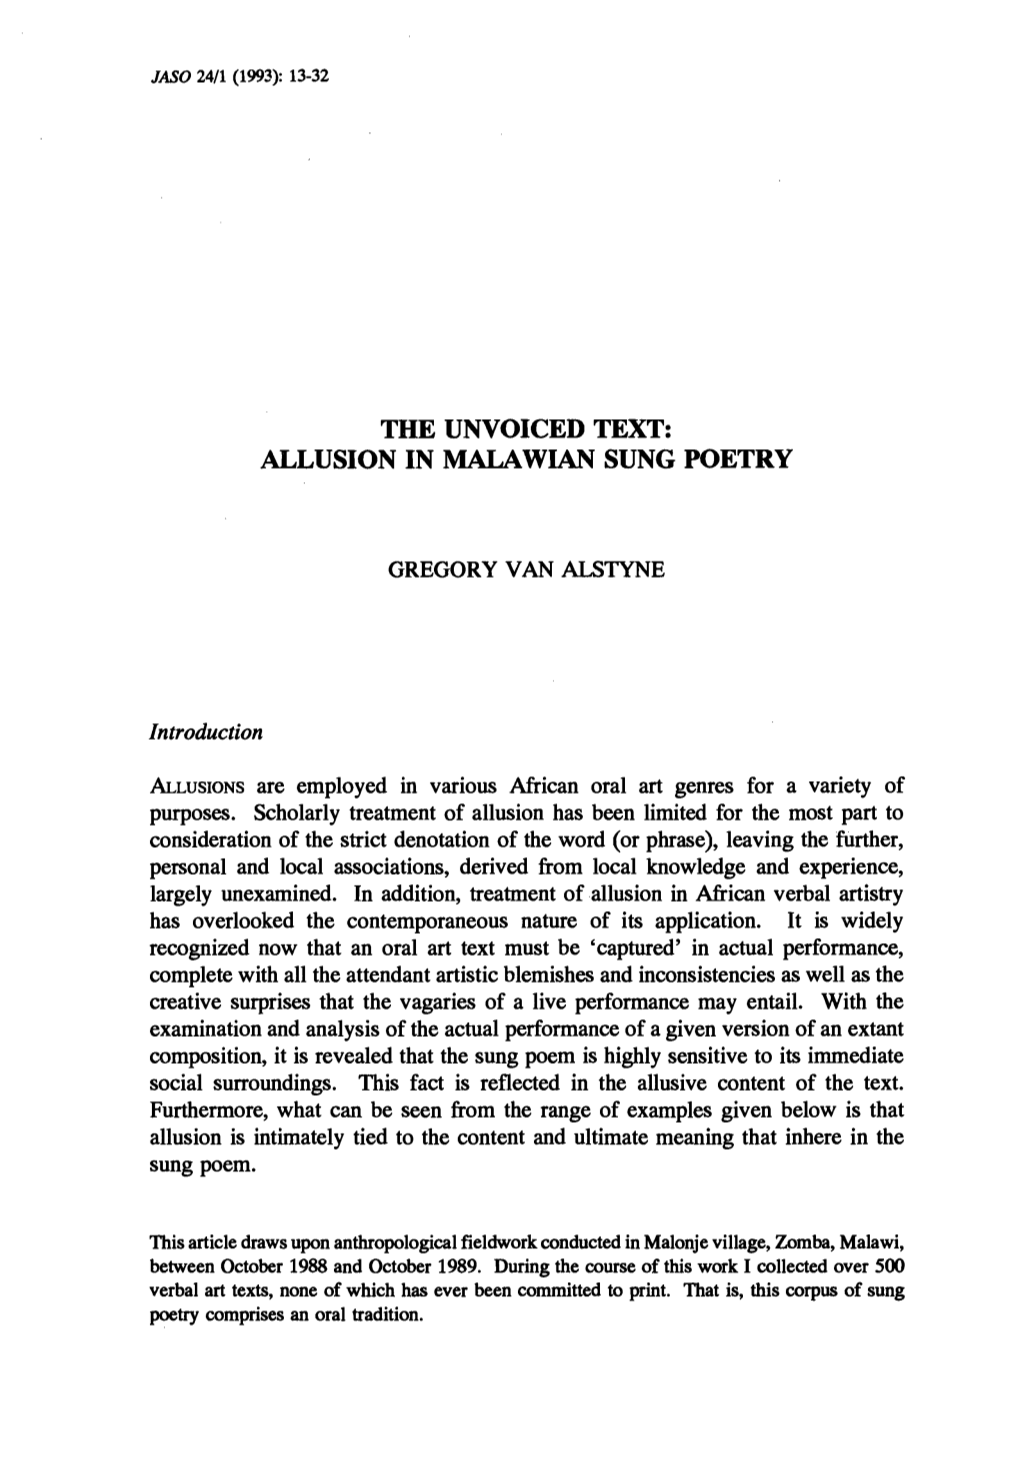 The Unvoiced Text: Allusion in Mala Wian Sung Poetry